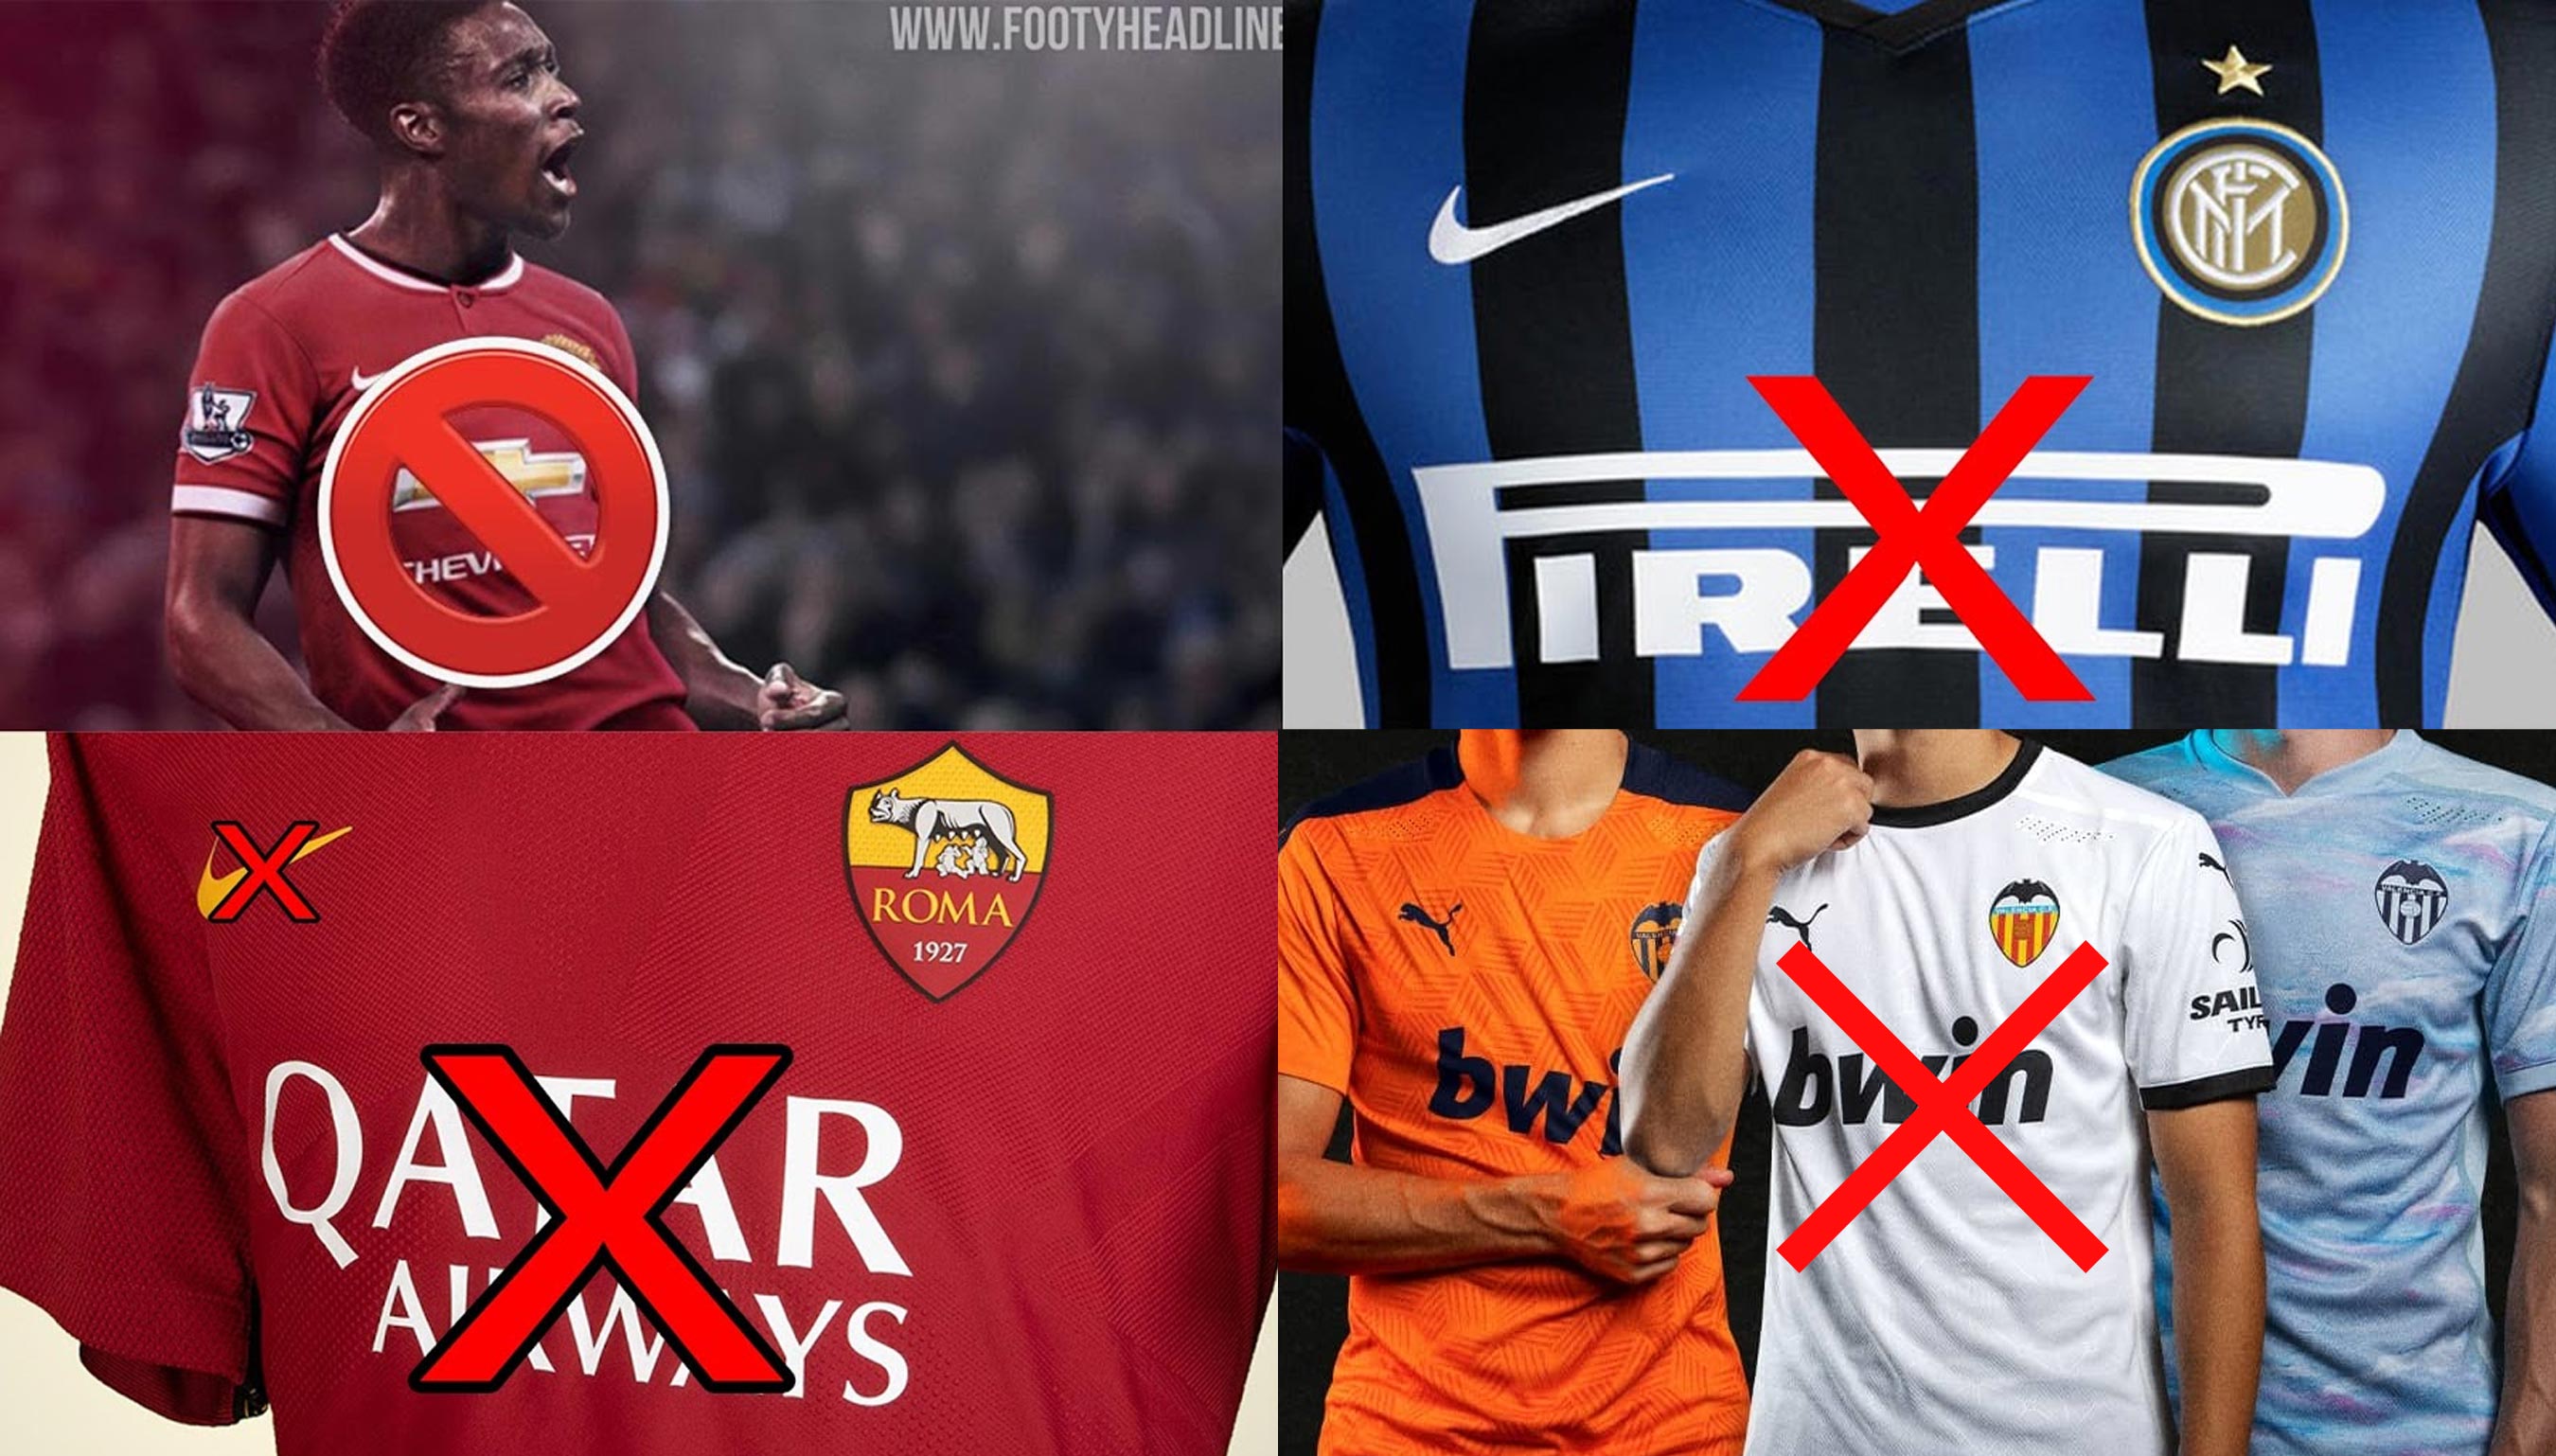 Shirt Sponsorship Contracts That Ended Ahead Of 21-22 - Man Utd x  Chevrolet, Roma x Qatar Airways & Many, Many More - Footy Headlines